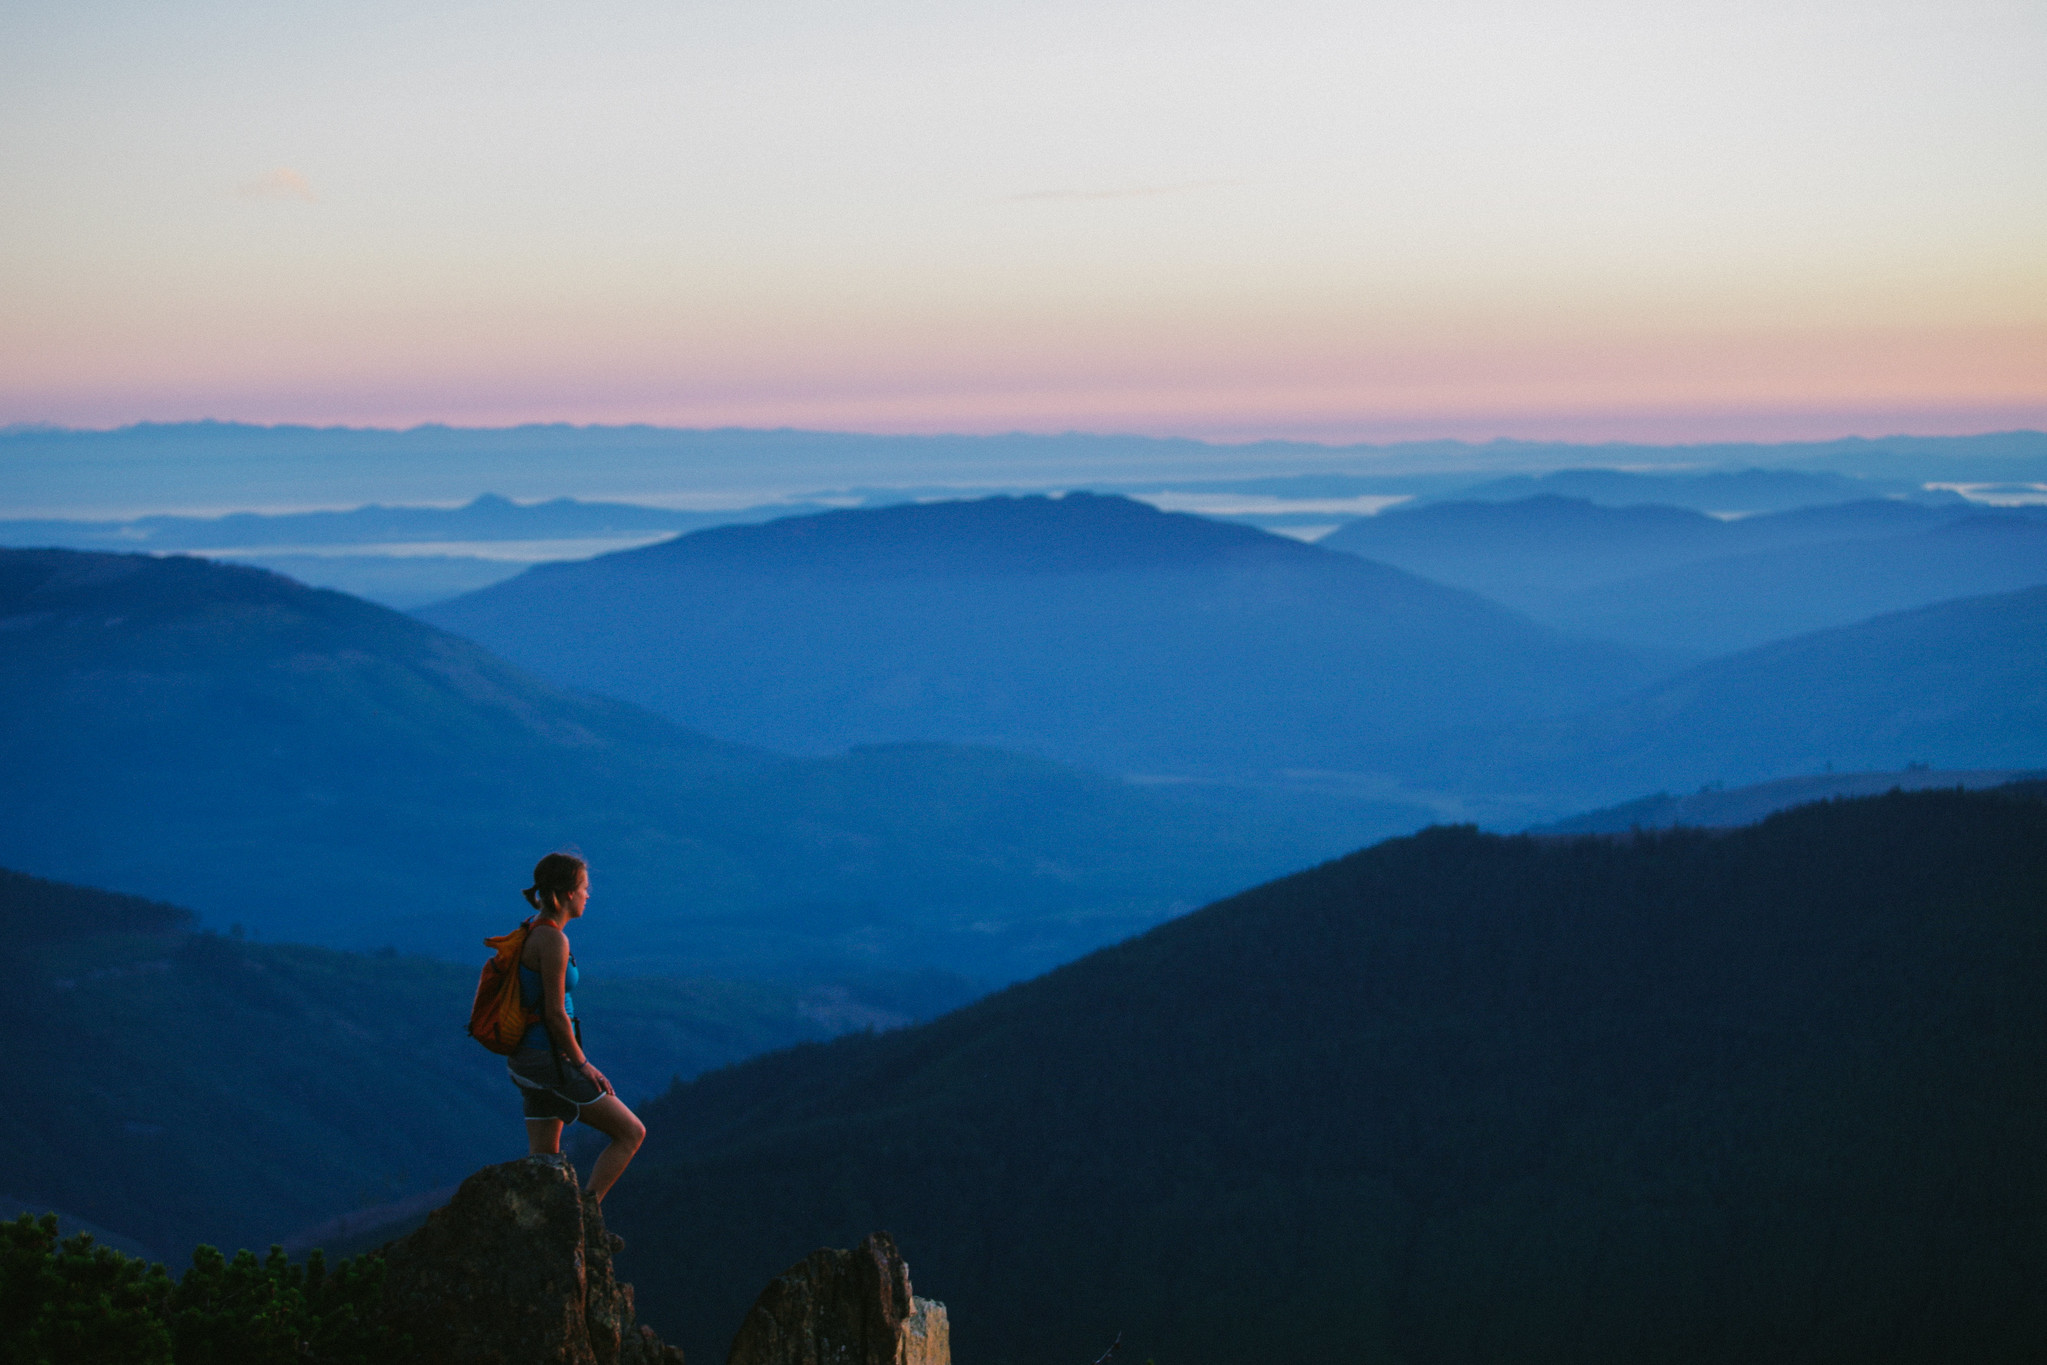 One hiker stands on top of a peak. From her viewpoint, we can see rolling hills all the way to the horizon. The sun is either just setting or just rising.